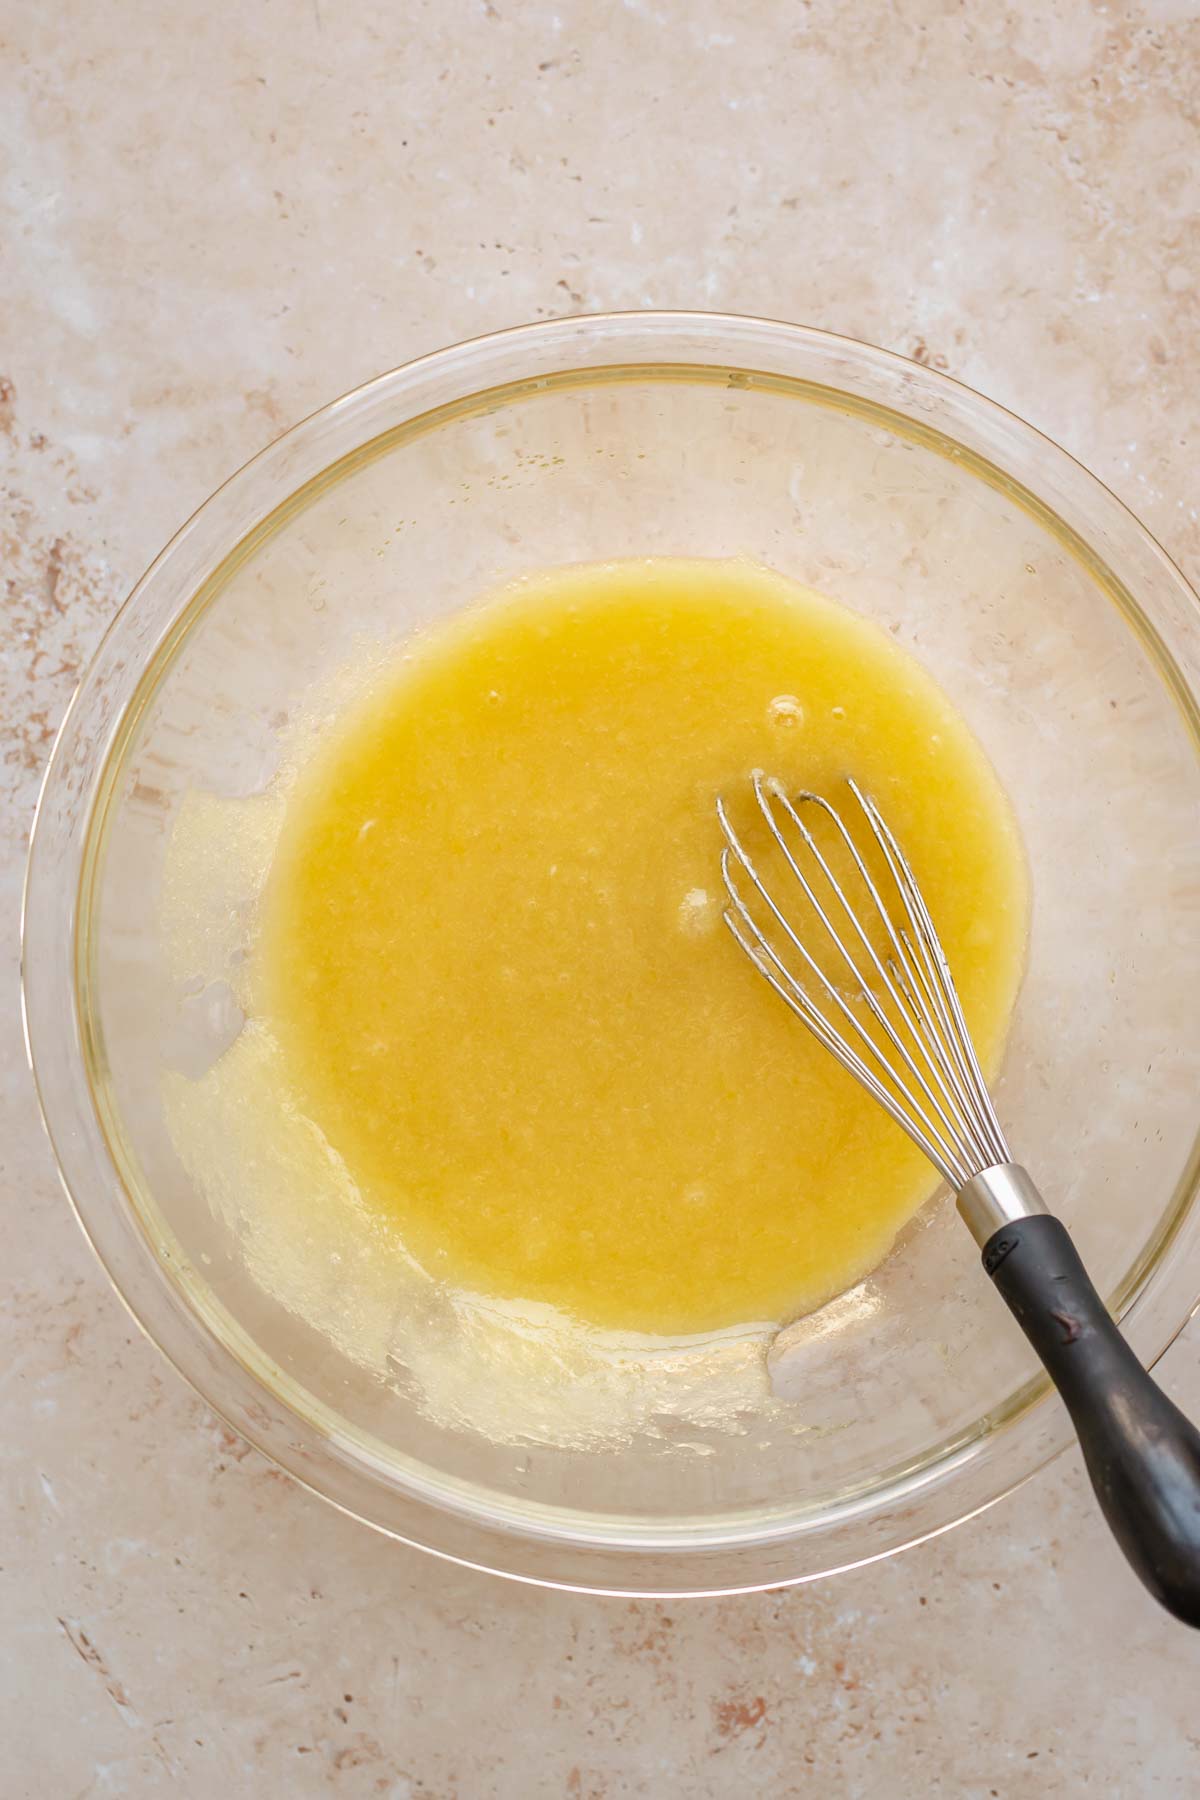 Eggs, sugar and oil in a bowl with a whisk.